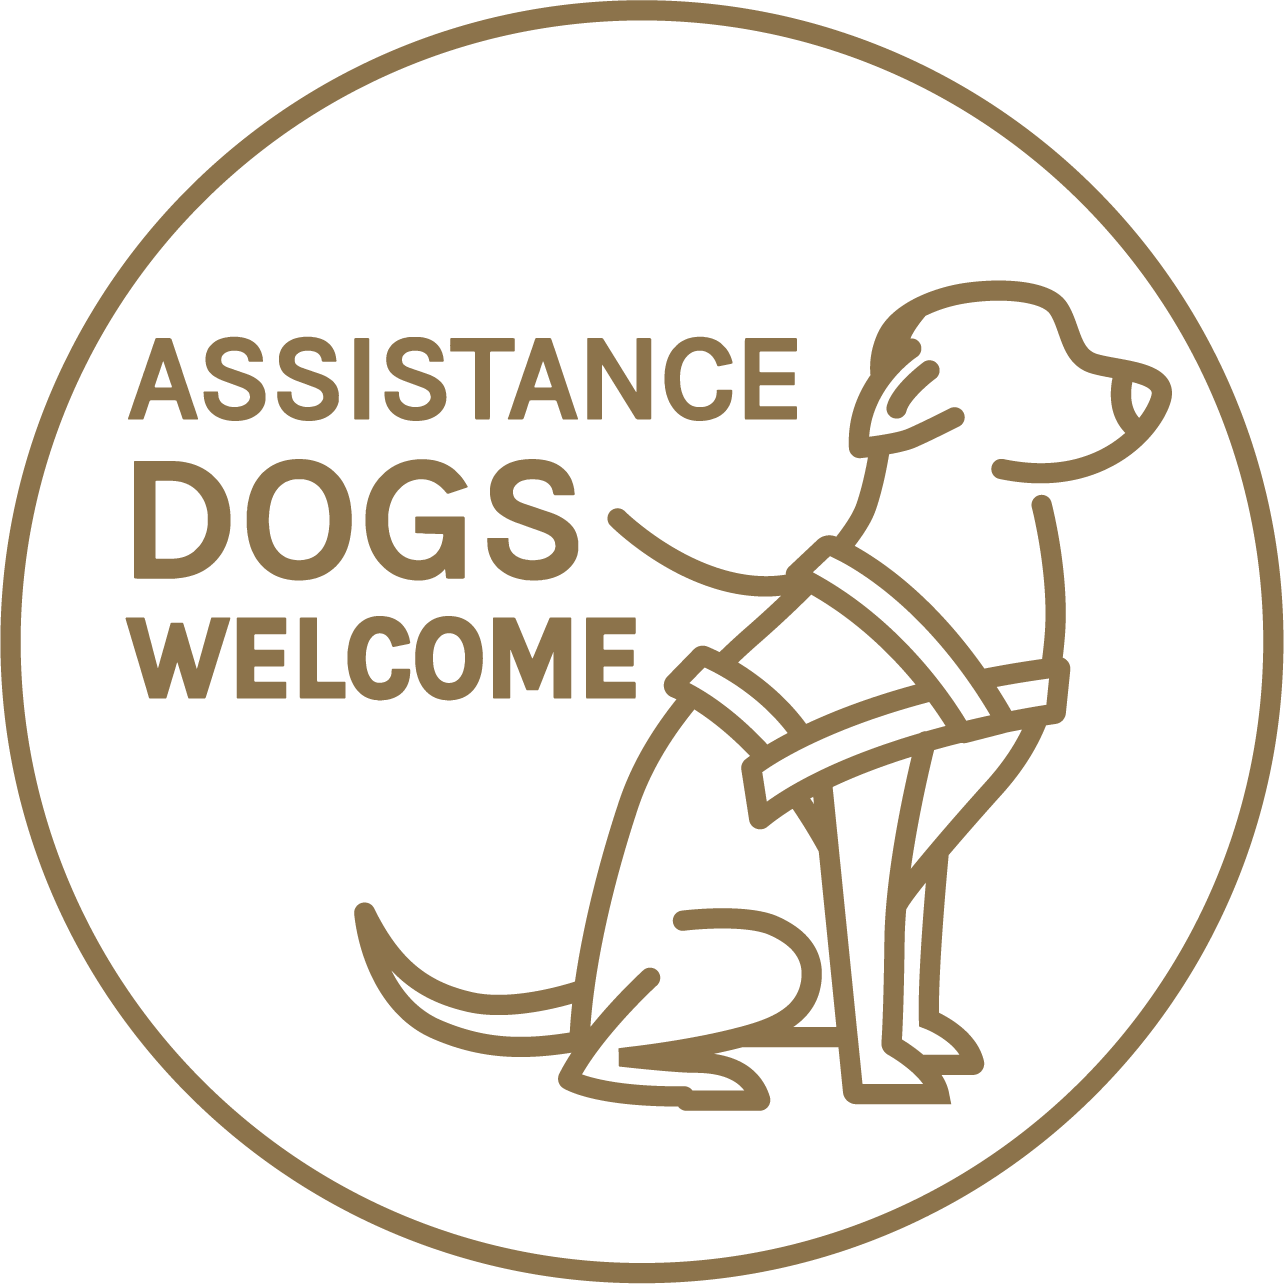 Assistance dogs are welcome